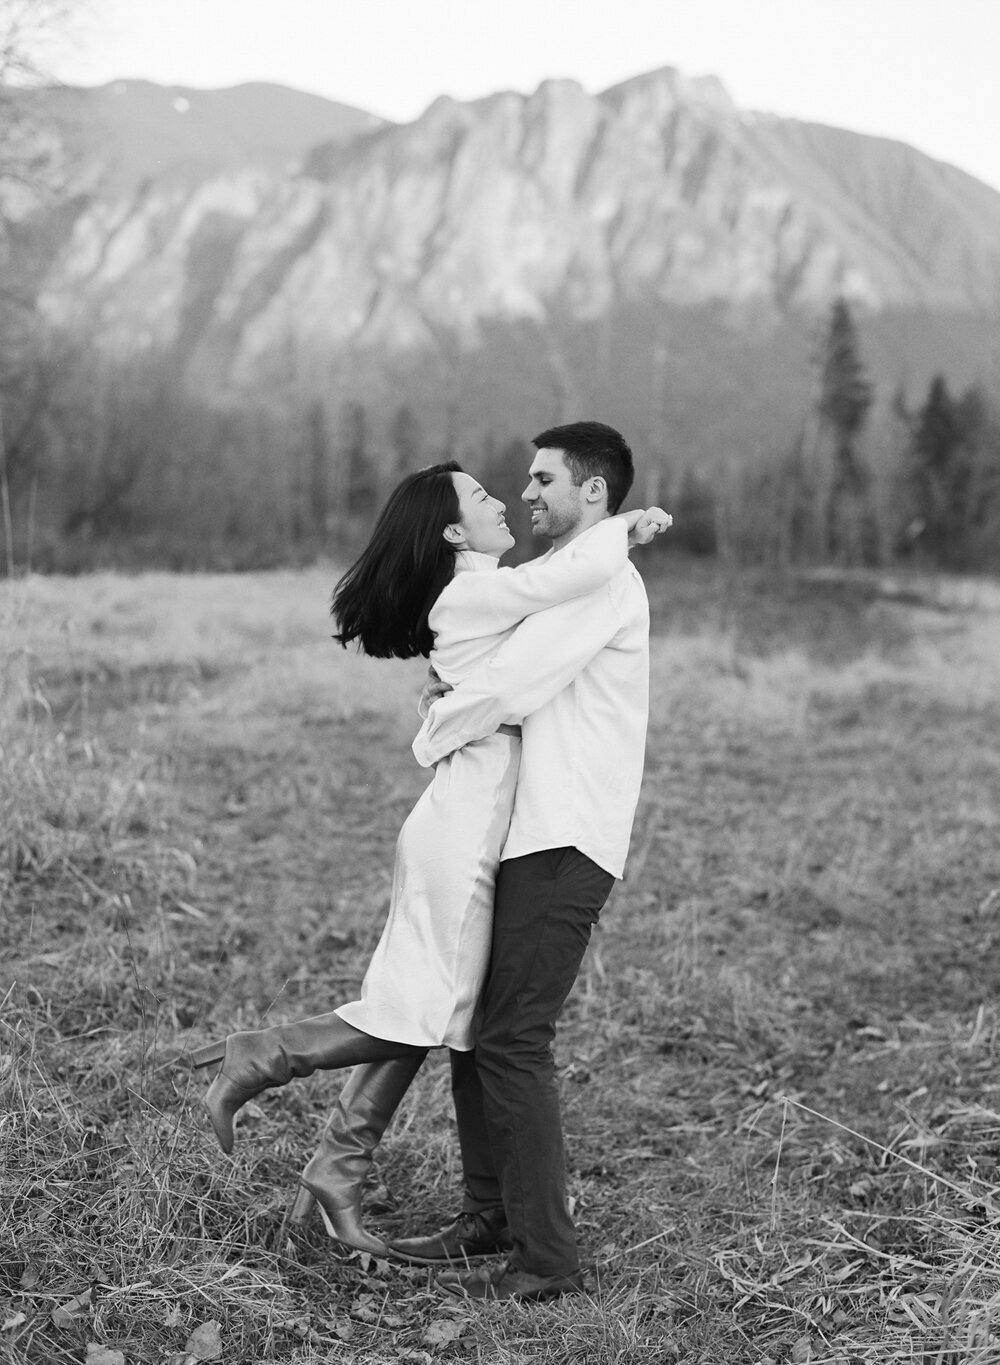 Mountain View Engagement Session on Film in North Bend - Tetiana Photography - C&N - 16